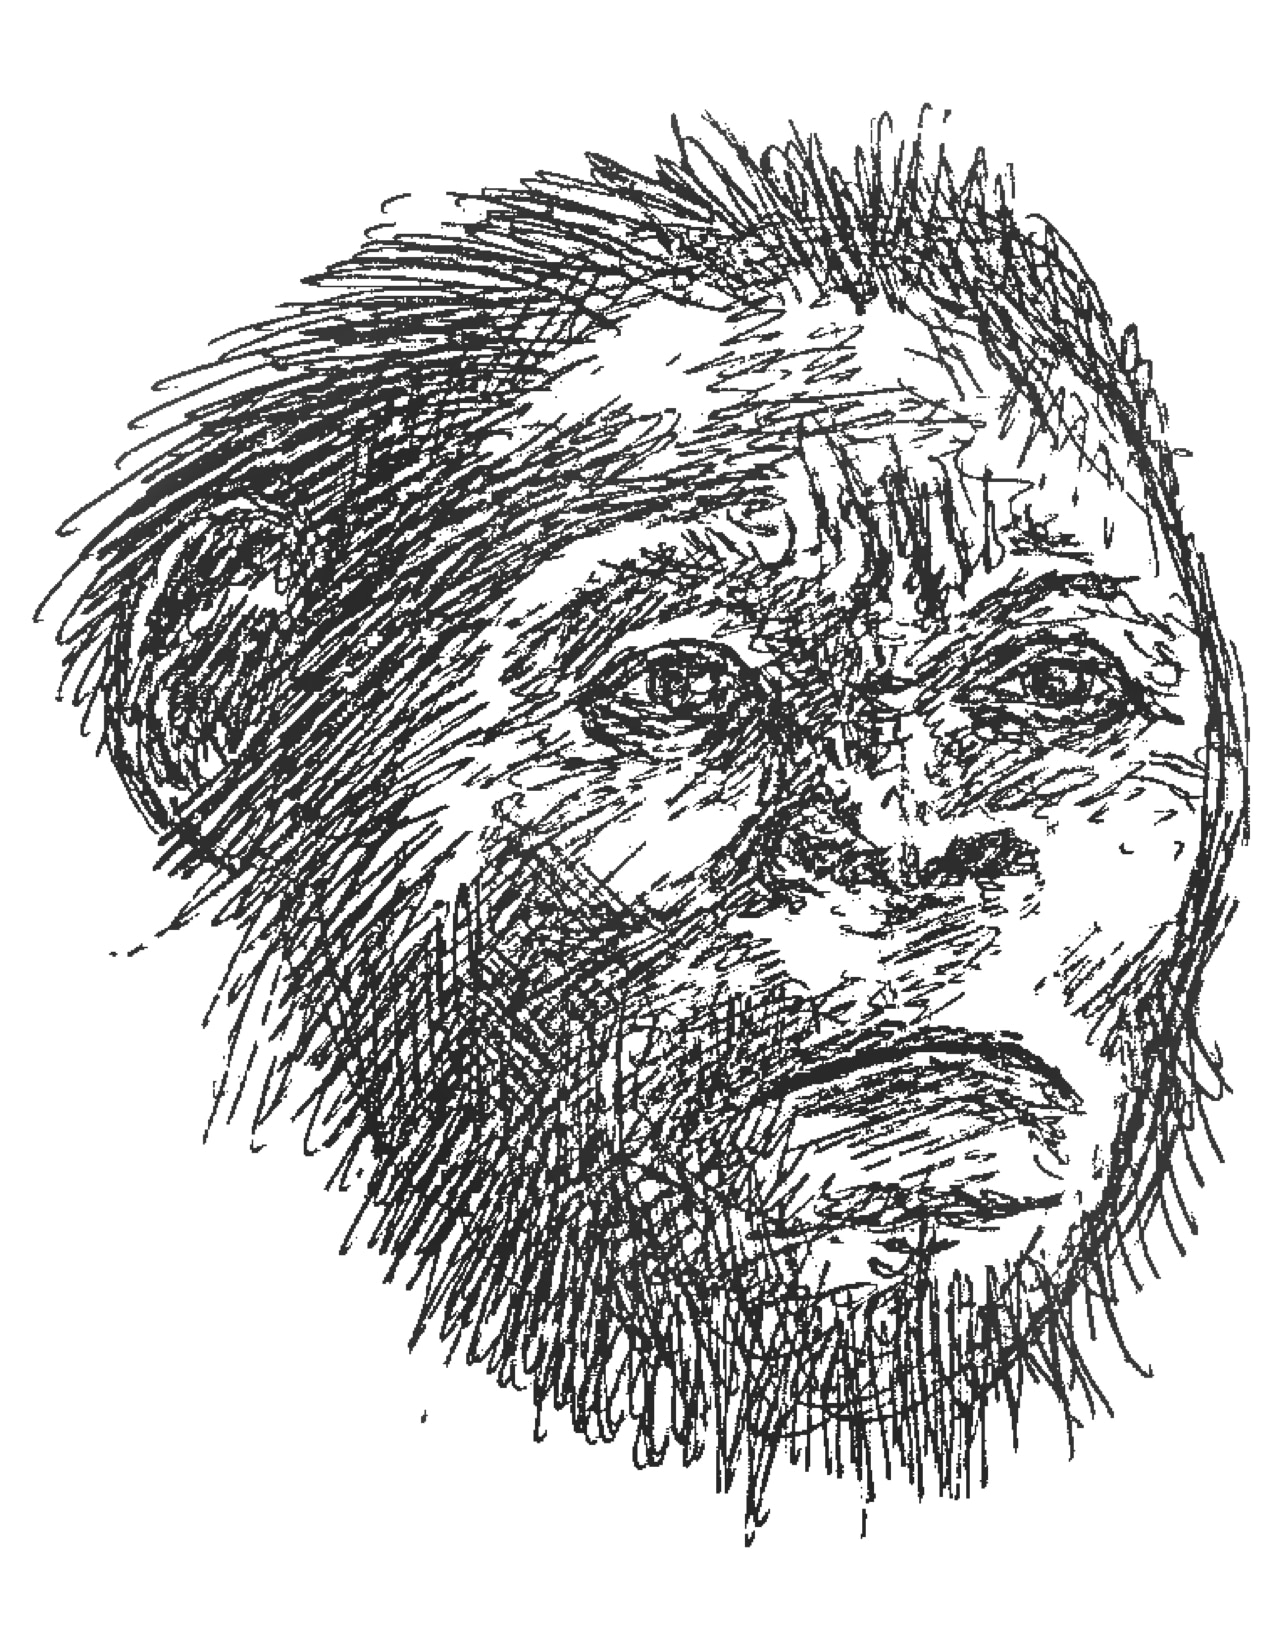 Homo naledi: The Newest Member of Our Family